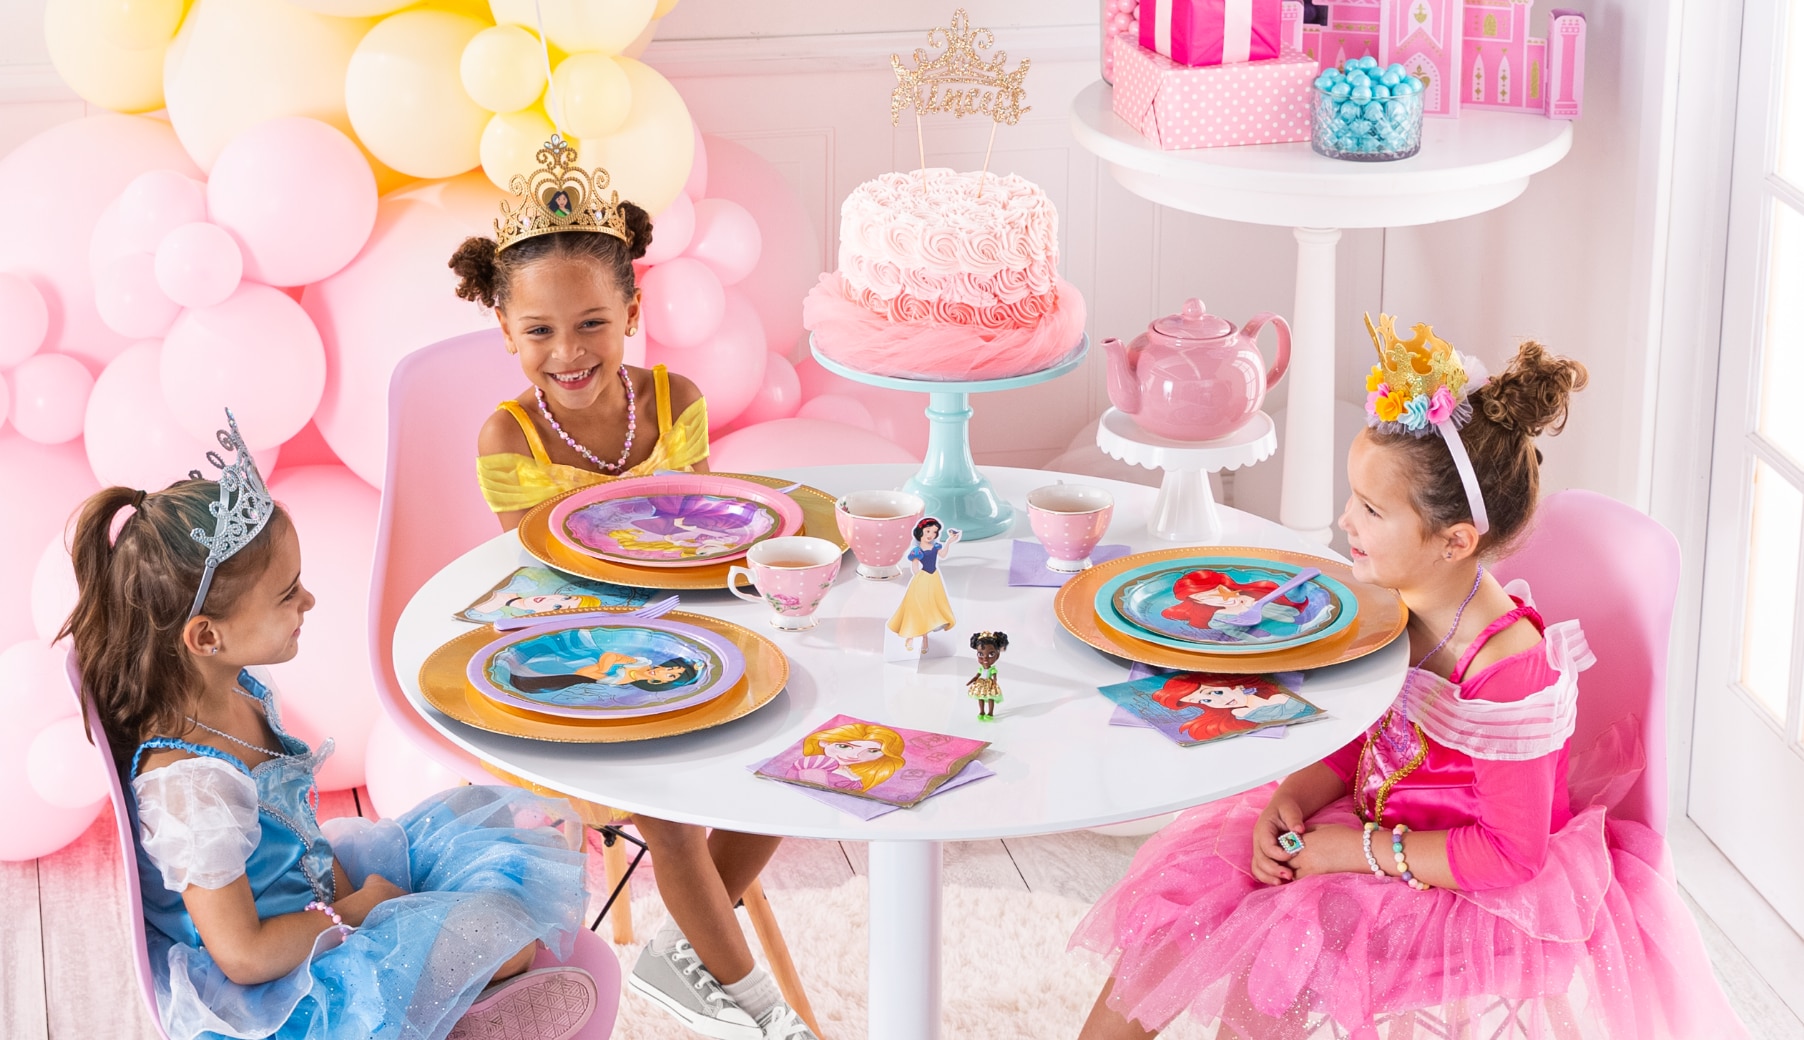 Three young girls dressed as princesses sitting at a birthday dessert table set with princess-themed plates, napkins and tea cups.